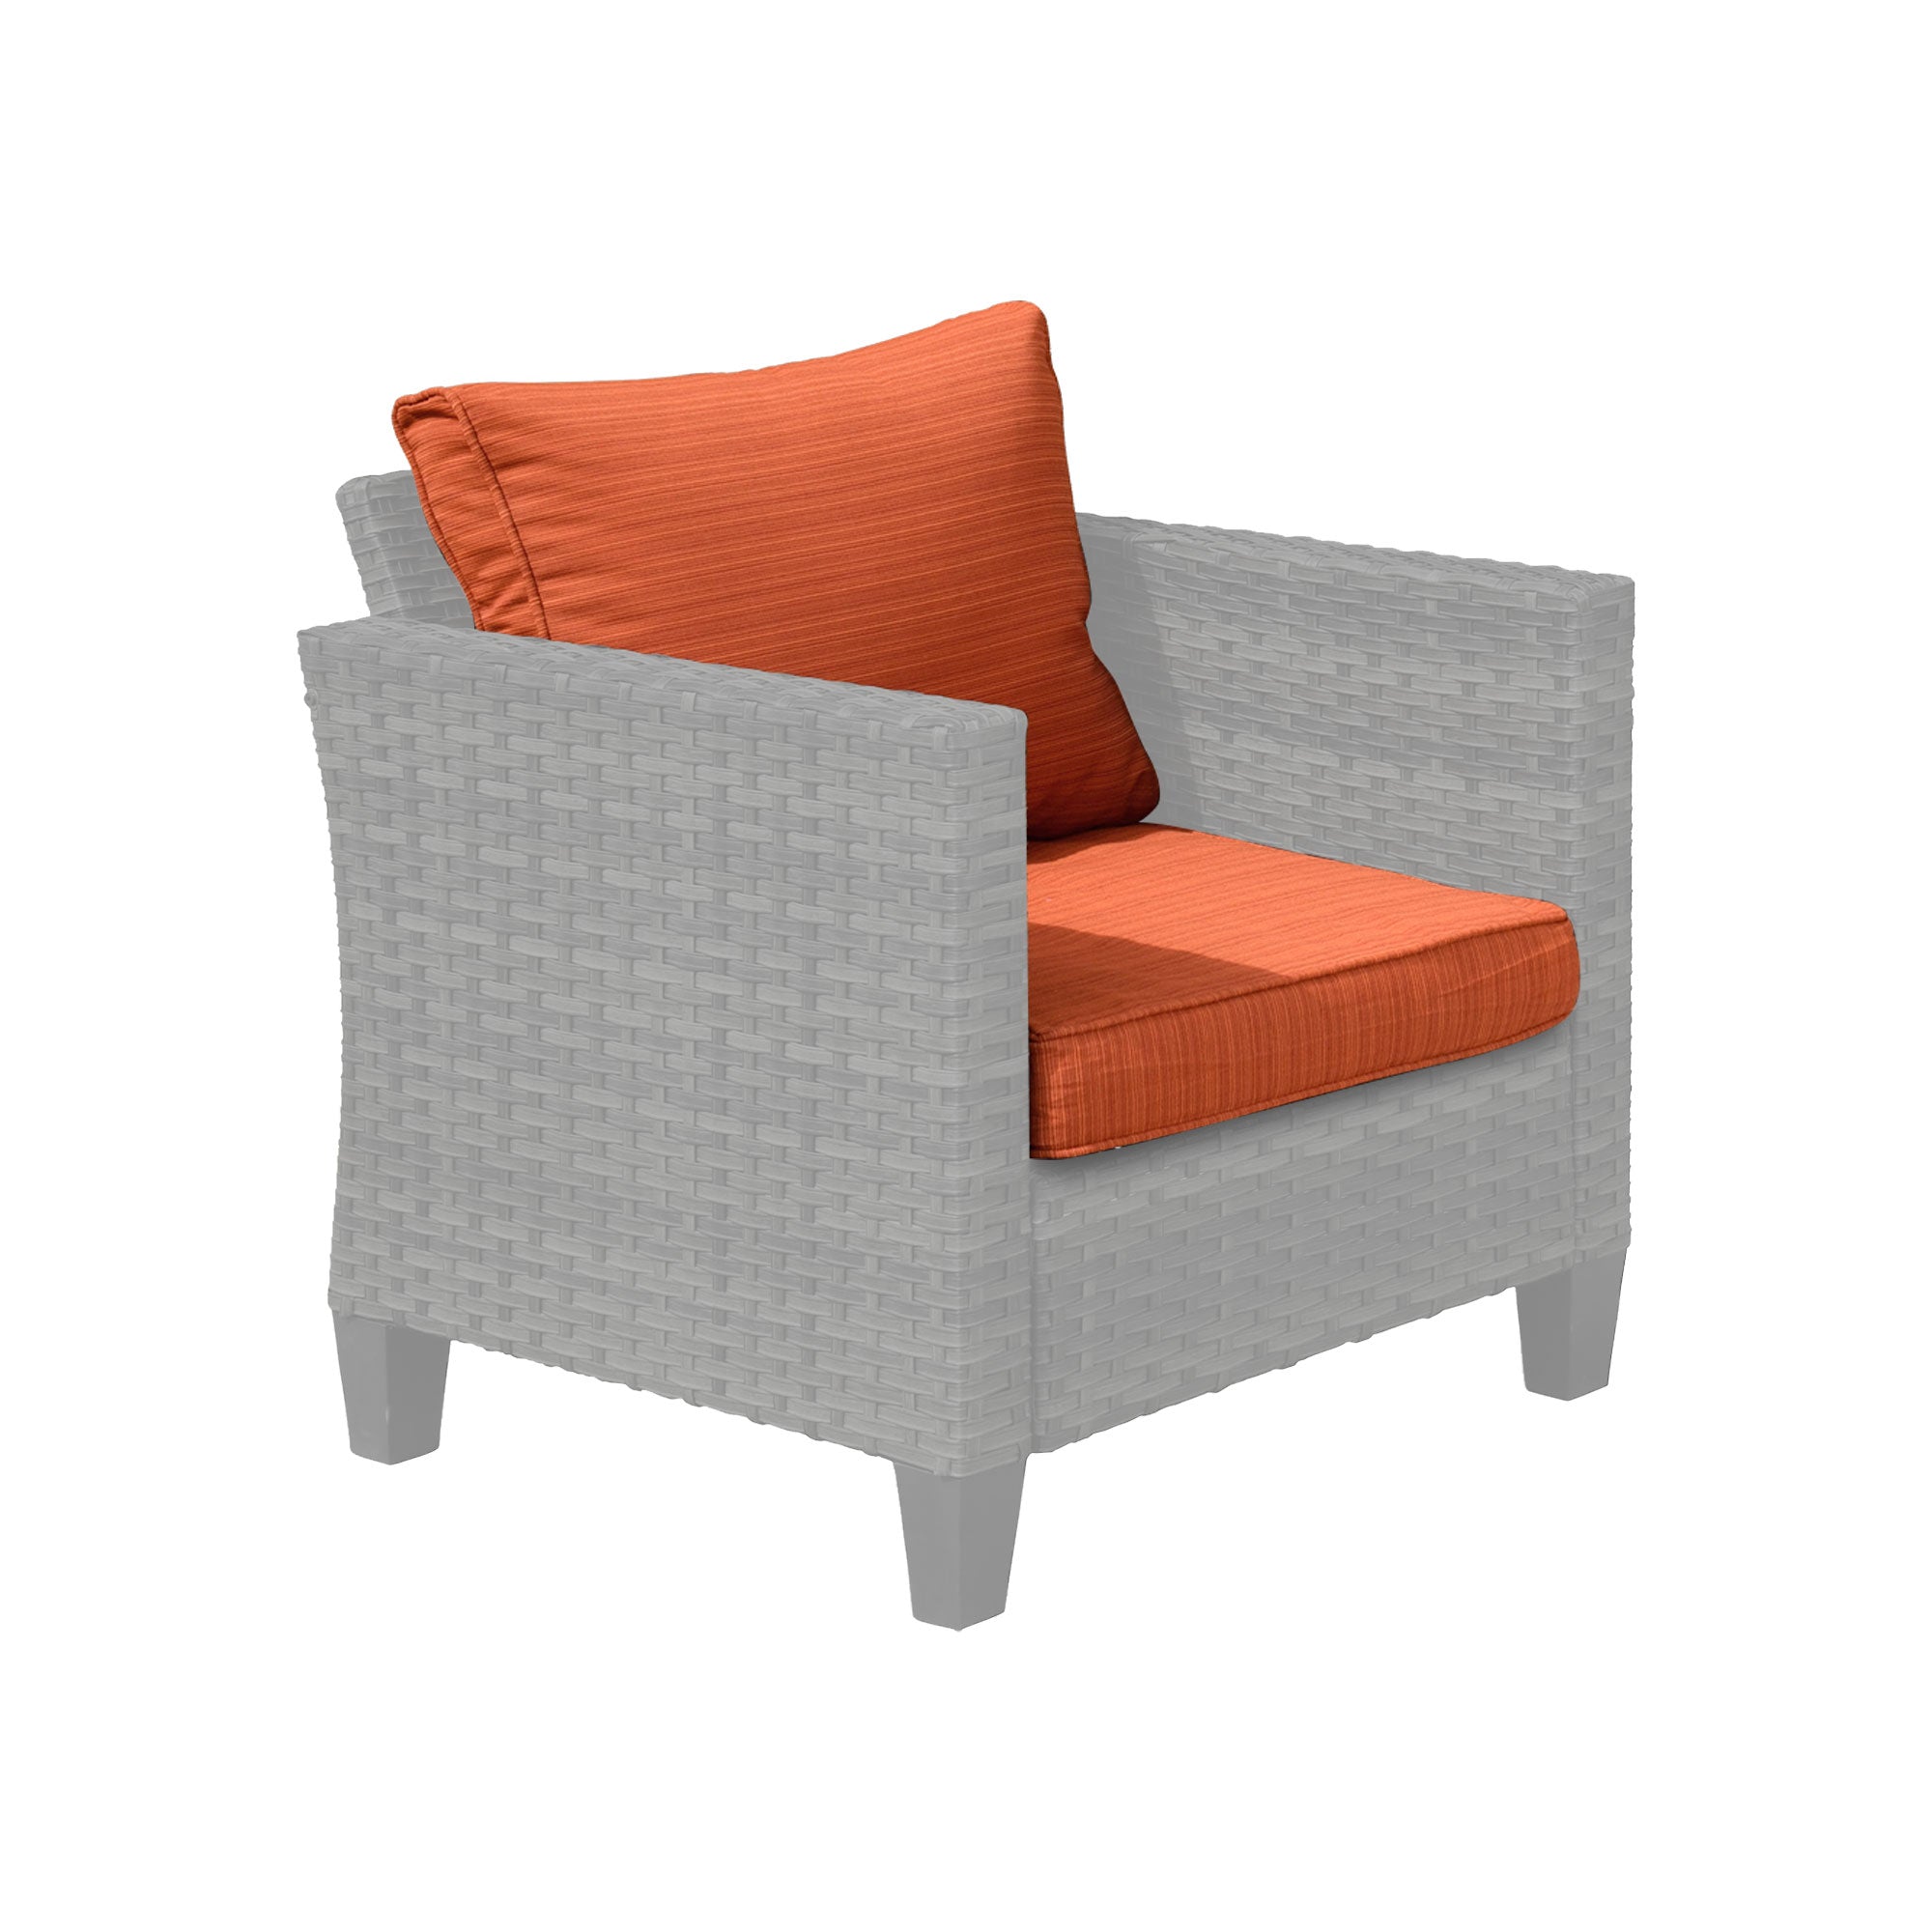 #Color_Orange Red|#Type_Chair/Loveseat:Seat+Back Cushion